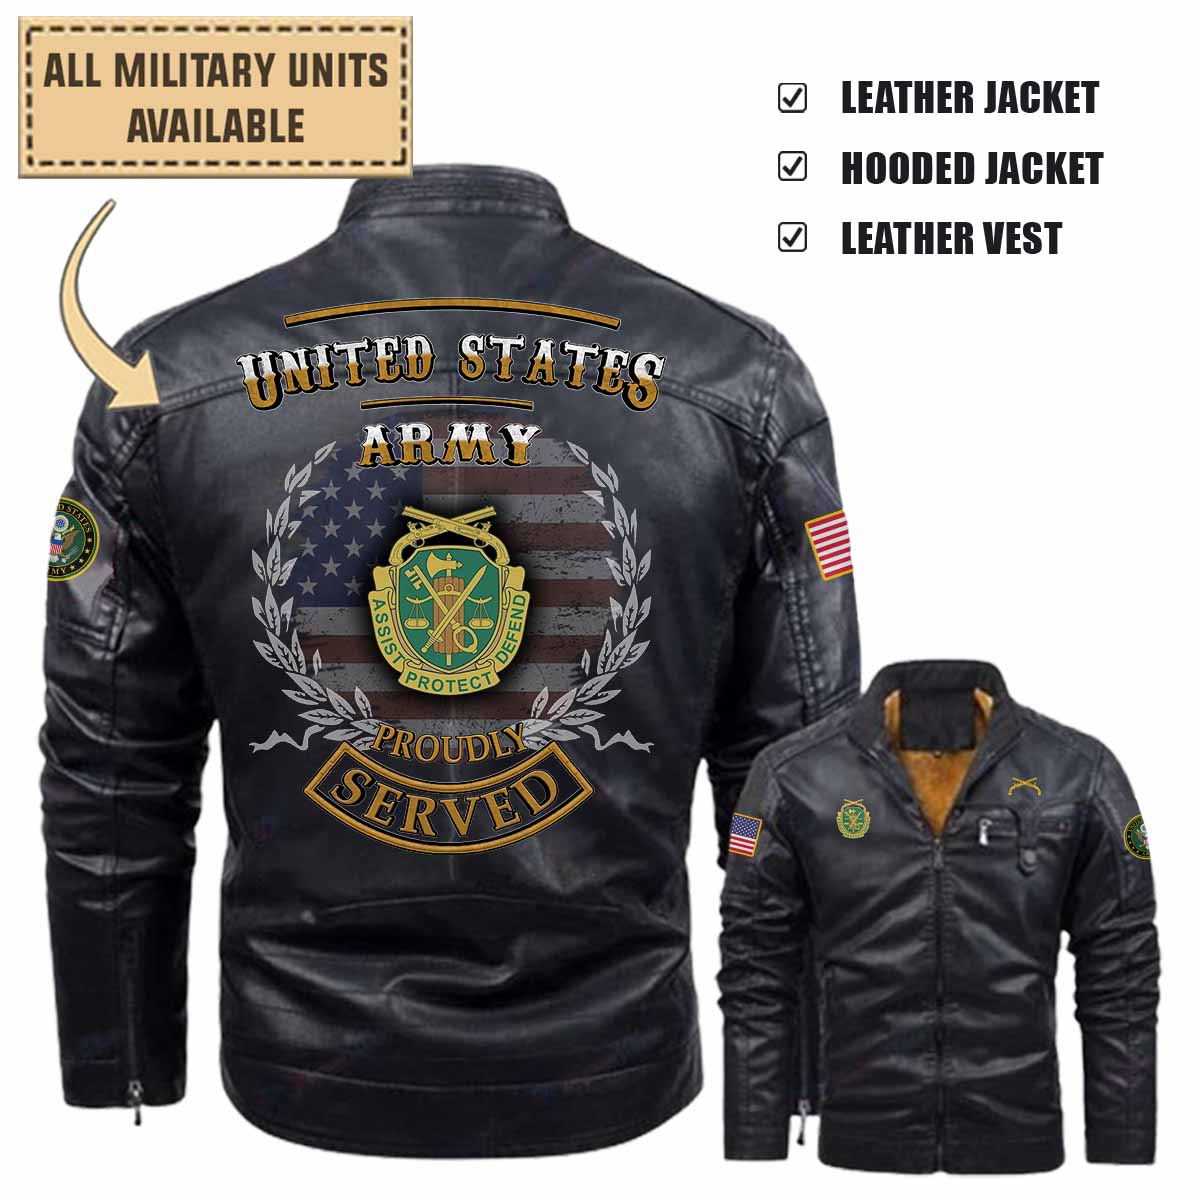 570th MP PLT 570th Military Police Platoon_Military Leather Jacket and Vest